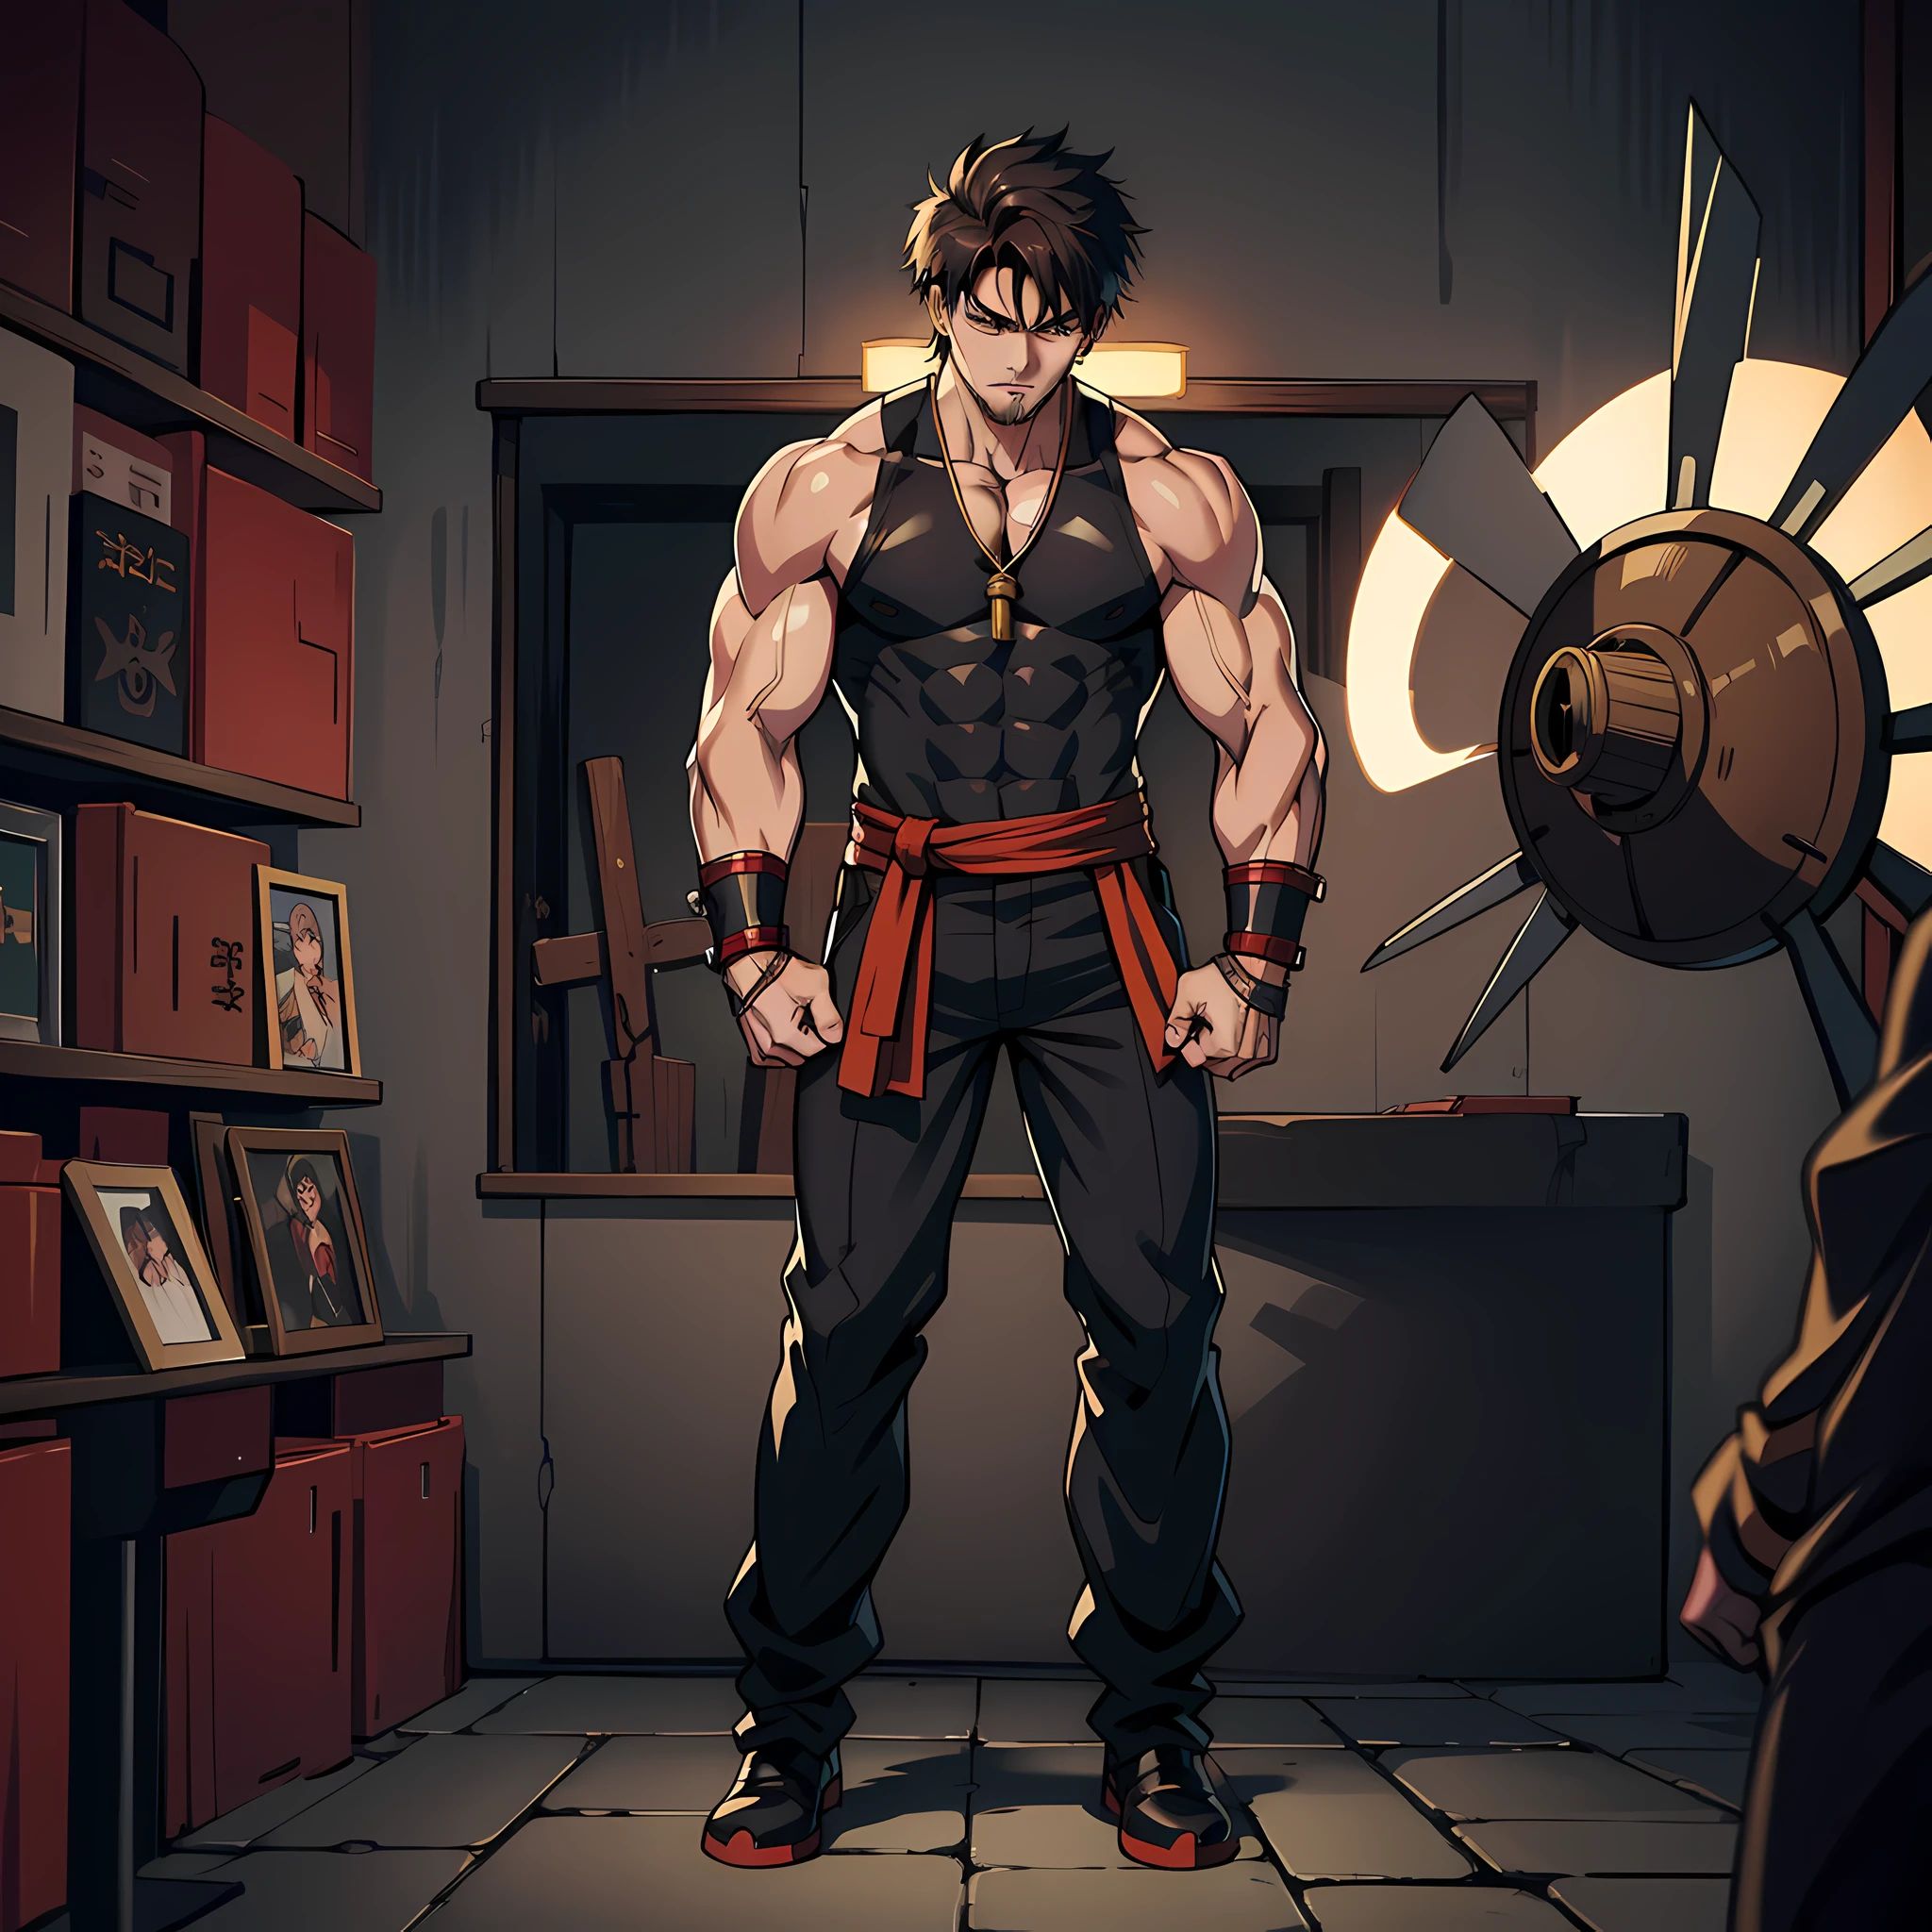 combining the Guilty Gear style with the artistic influence of Yusuke Murata, maximum detail, in 4k, Kaiden is tall and muscular, with broad shoulders and a determined expression. His short brown hair is framed by a well-groomed beard. His intense eyes are amber in color, conveying his energy and passion for fighting, He wears practical and comfortable clothes for hand-to-hand combat. Kaiden wears a sleeveless shirt and baggy pants of sturdy fabric, allowing for nimble movement. On his cuffs, he wears leather bandages for protection. He also wears sturdy leather boots to ensure stability during battles, Kaiden carries with him a pair of reinforced leather gloves, which increase his punching power and protect his fists during combat. In addition, he possesses a fist-shaped amulet made of an ancient metal, passed down from generation to generation in his family, symbolizing his lineage of warriors.